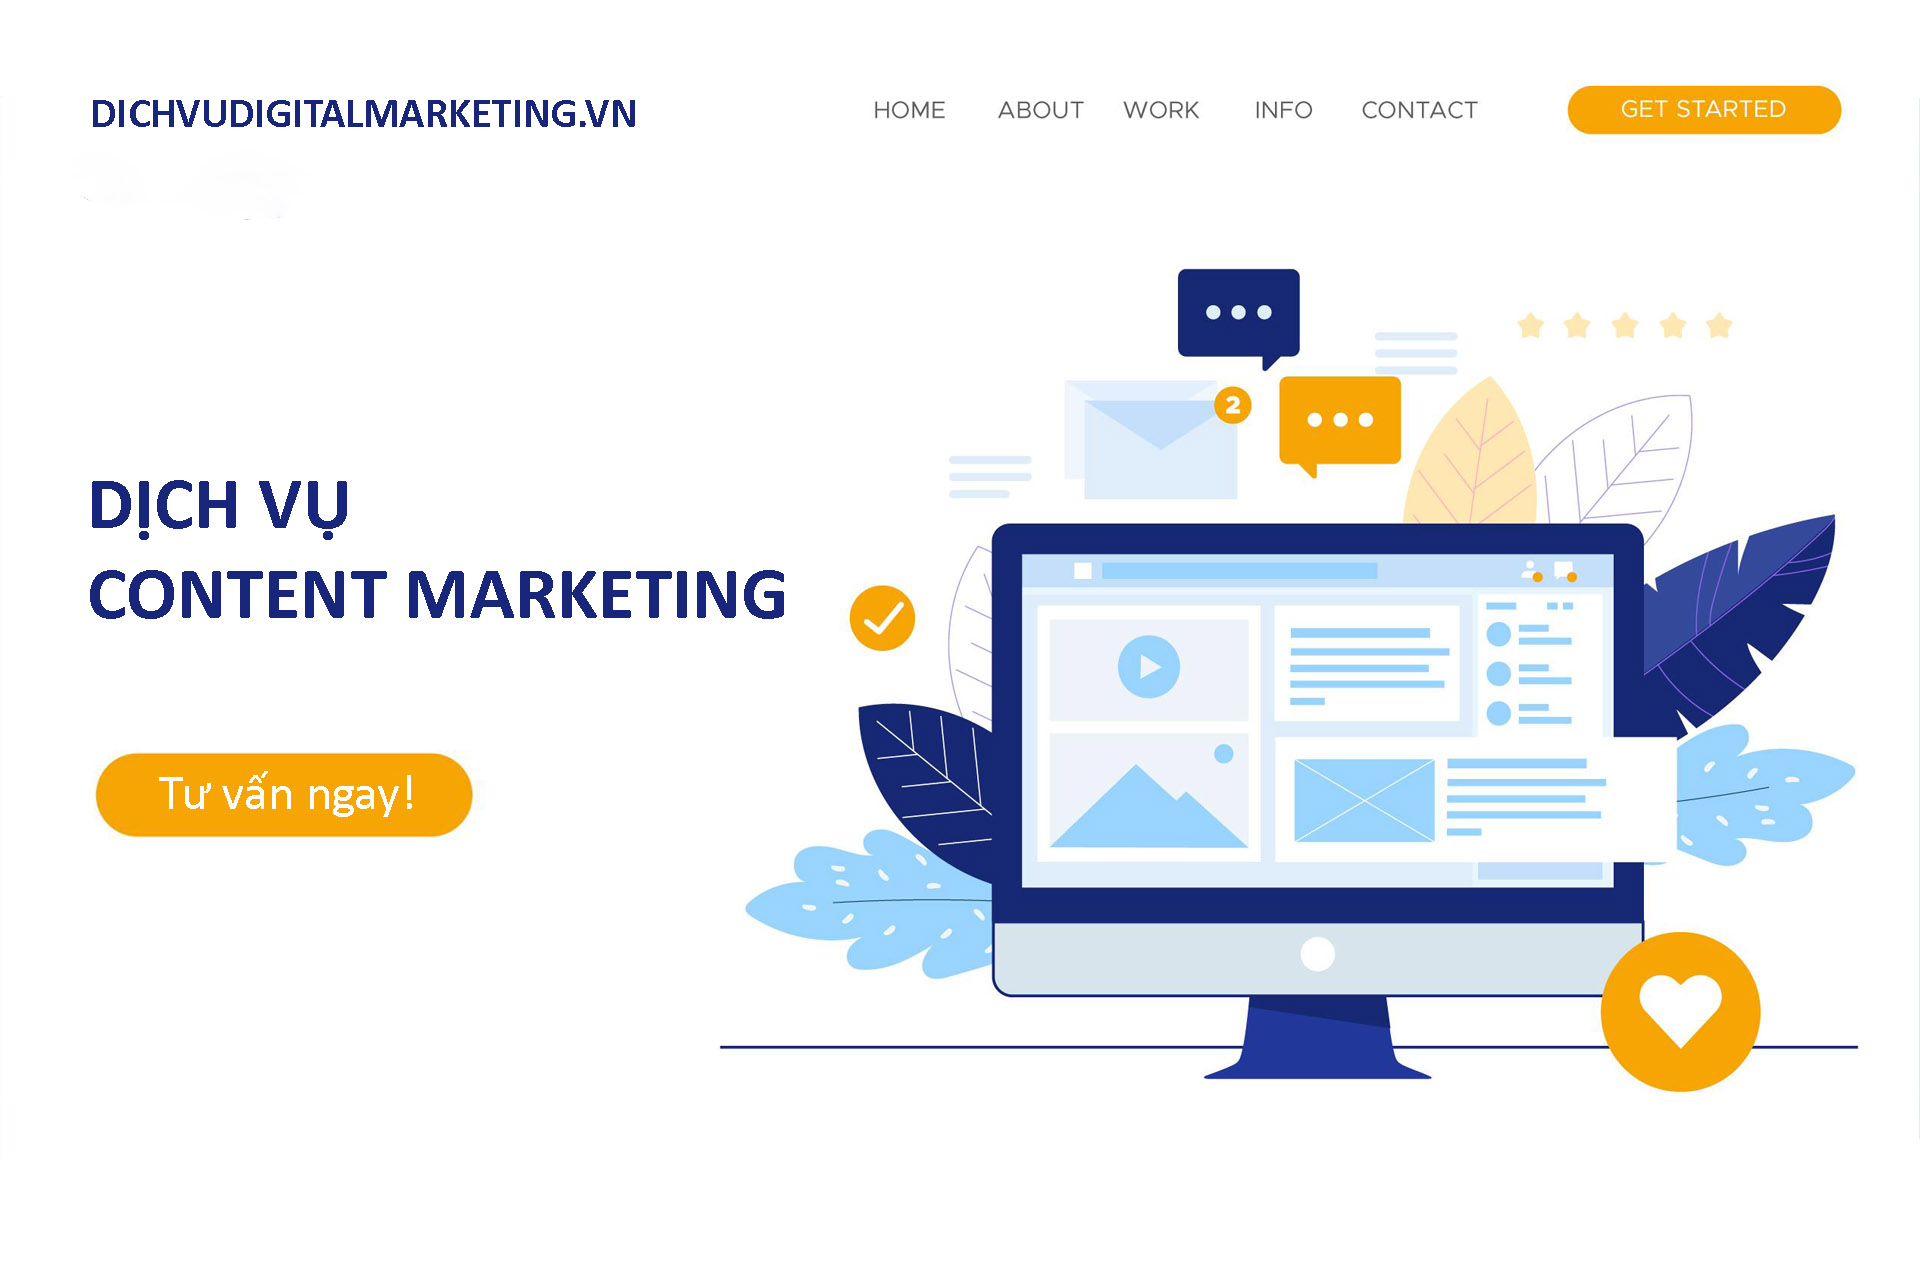 Dịch vụ Content Marketing